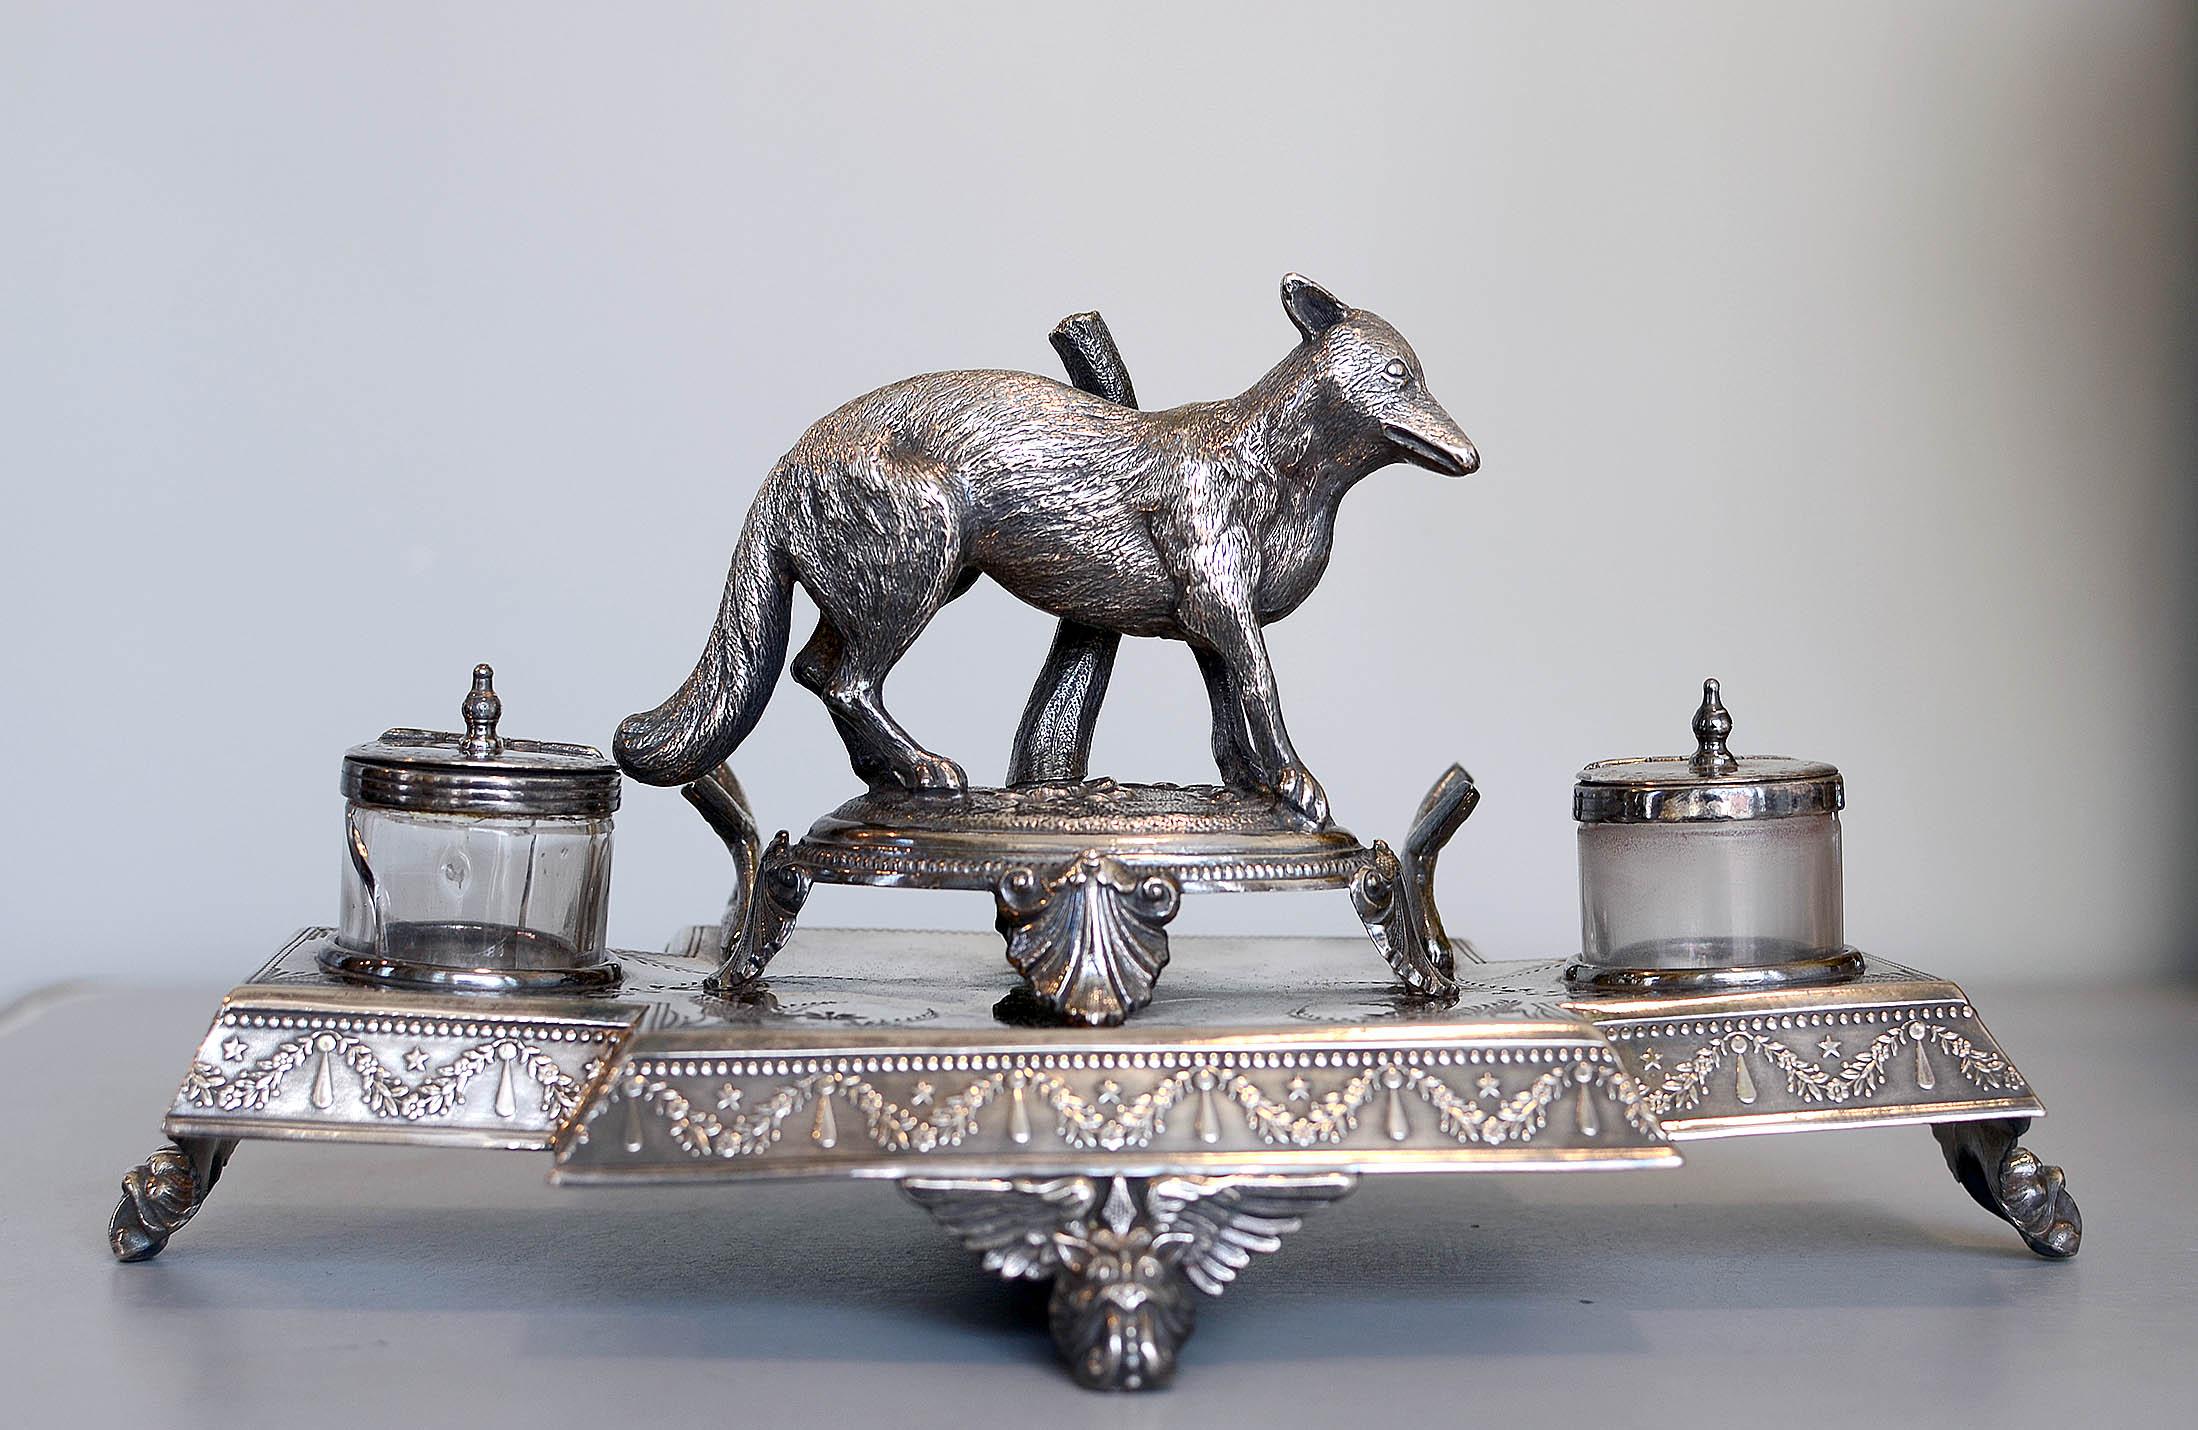 James Deakin & Sons Ltd.
Sheffield, England; ca. 1897-1935
Silver plated copper and glass

Approximate size: 11 (w) x 6 (h) x 6 (d) in.

This lovely silver-plated inkwell features an elegant base with a swag and teardrop raised motif along its